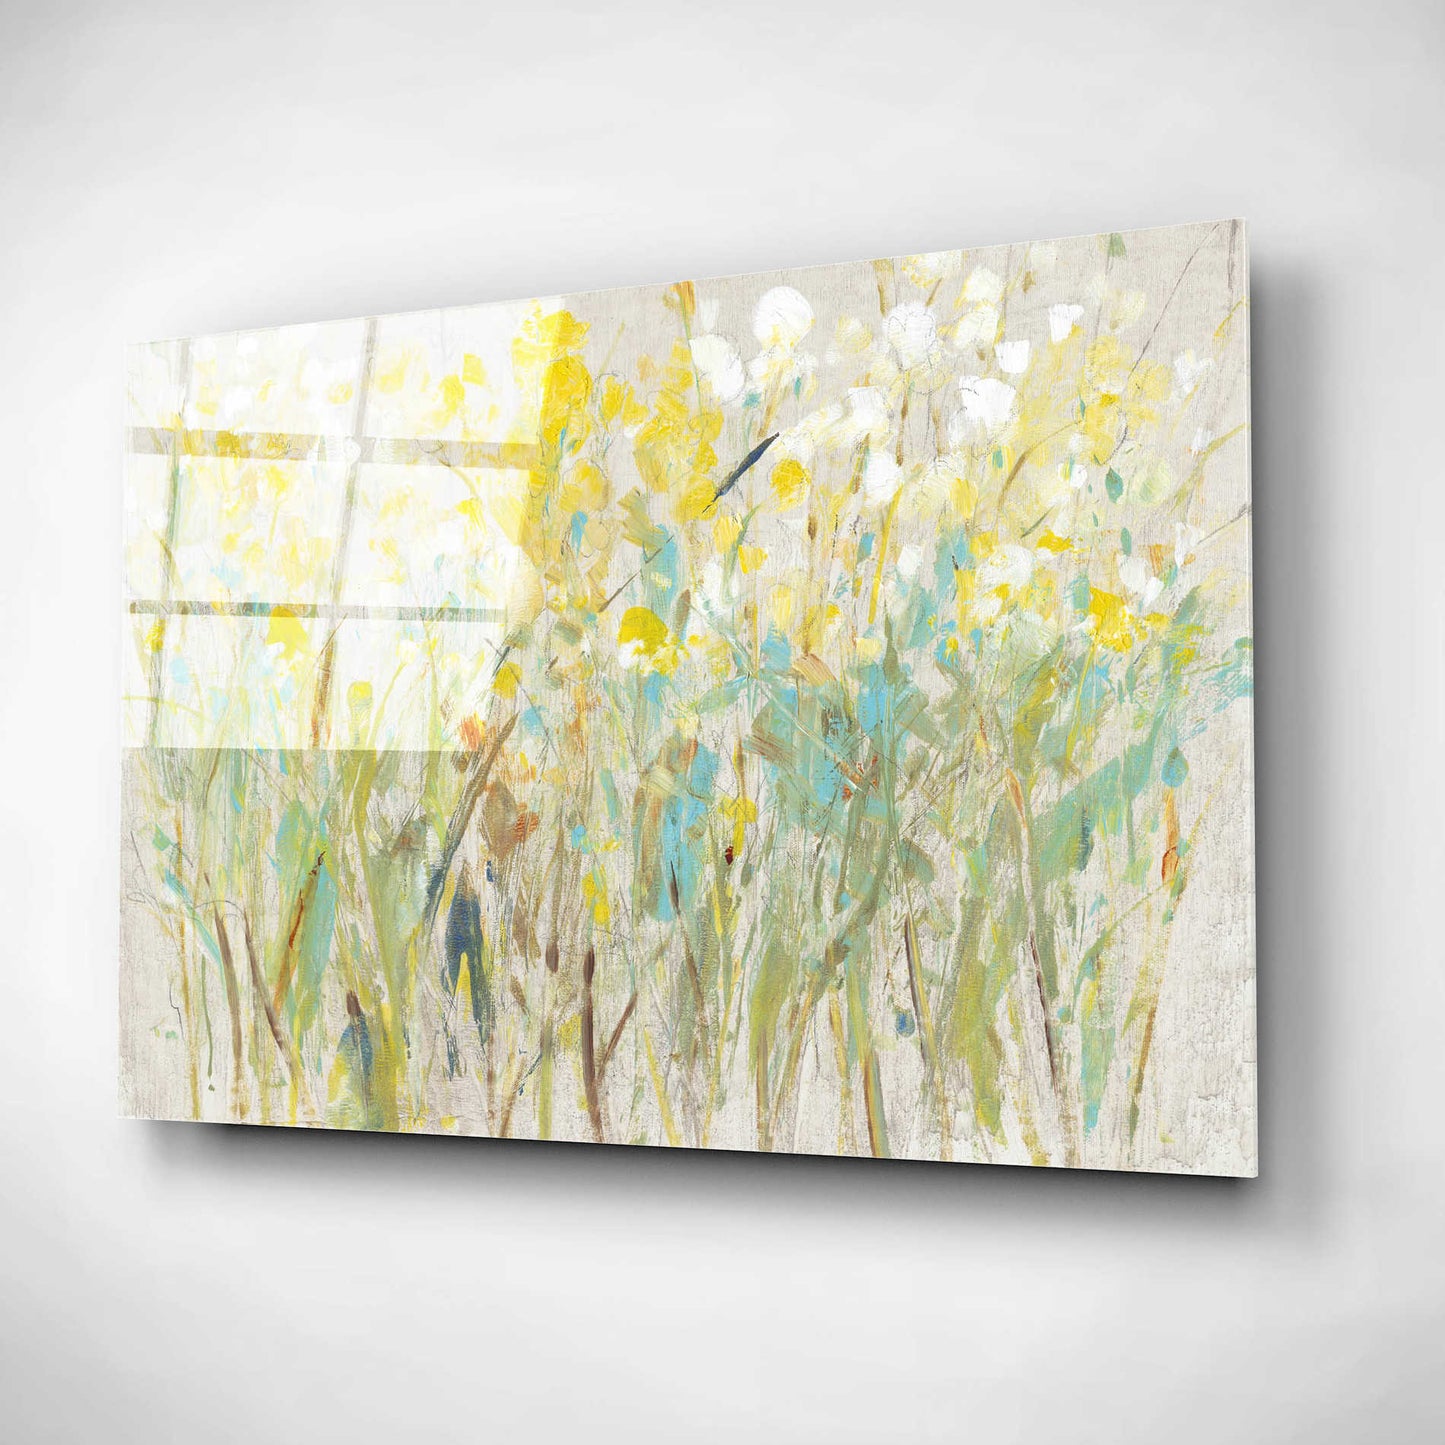 Epic Art 'Floral Cluster I' by Tim O'Toole, Acrylic Glass Wall Art,16x12